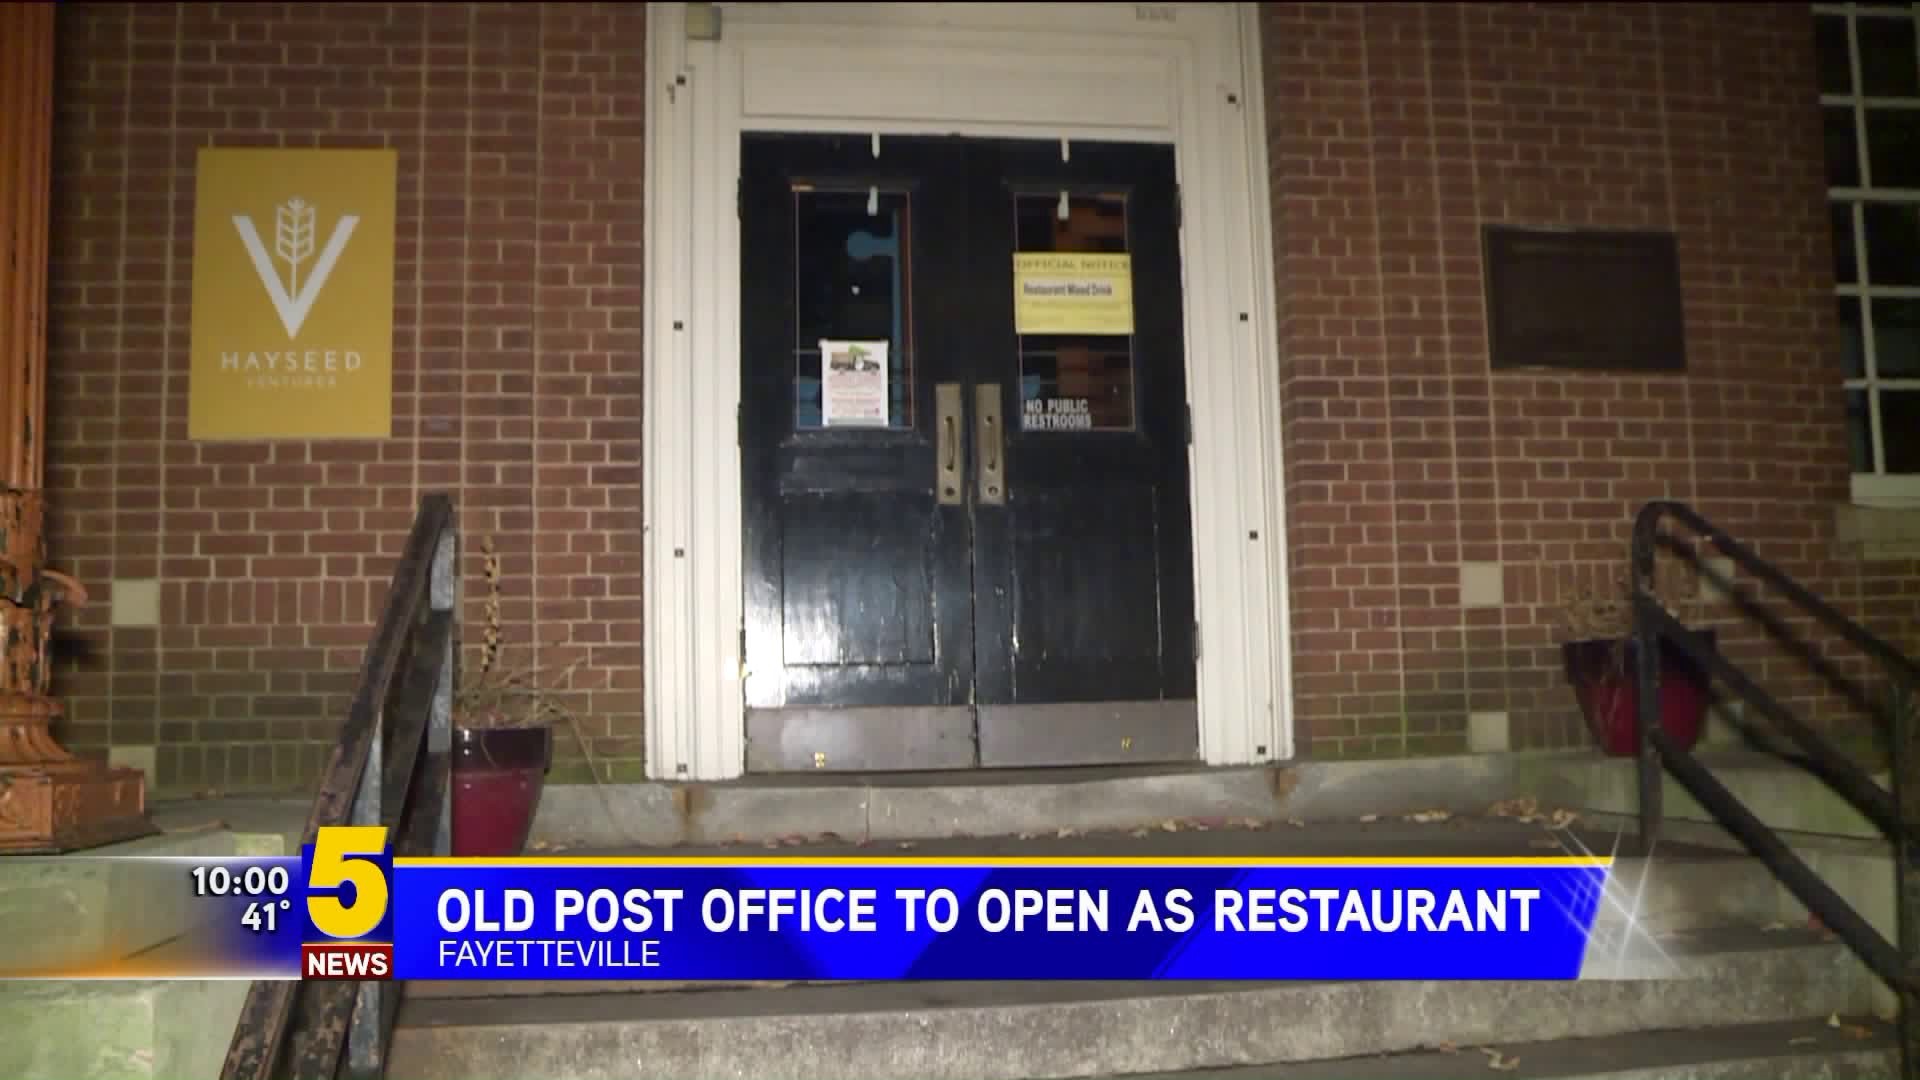 Old Post Office In Fayetteville To Open As Restaurant